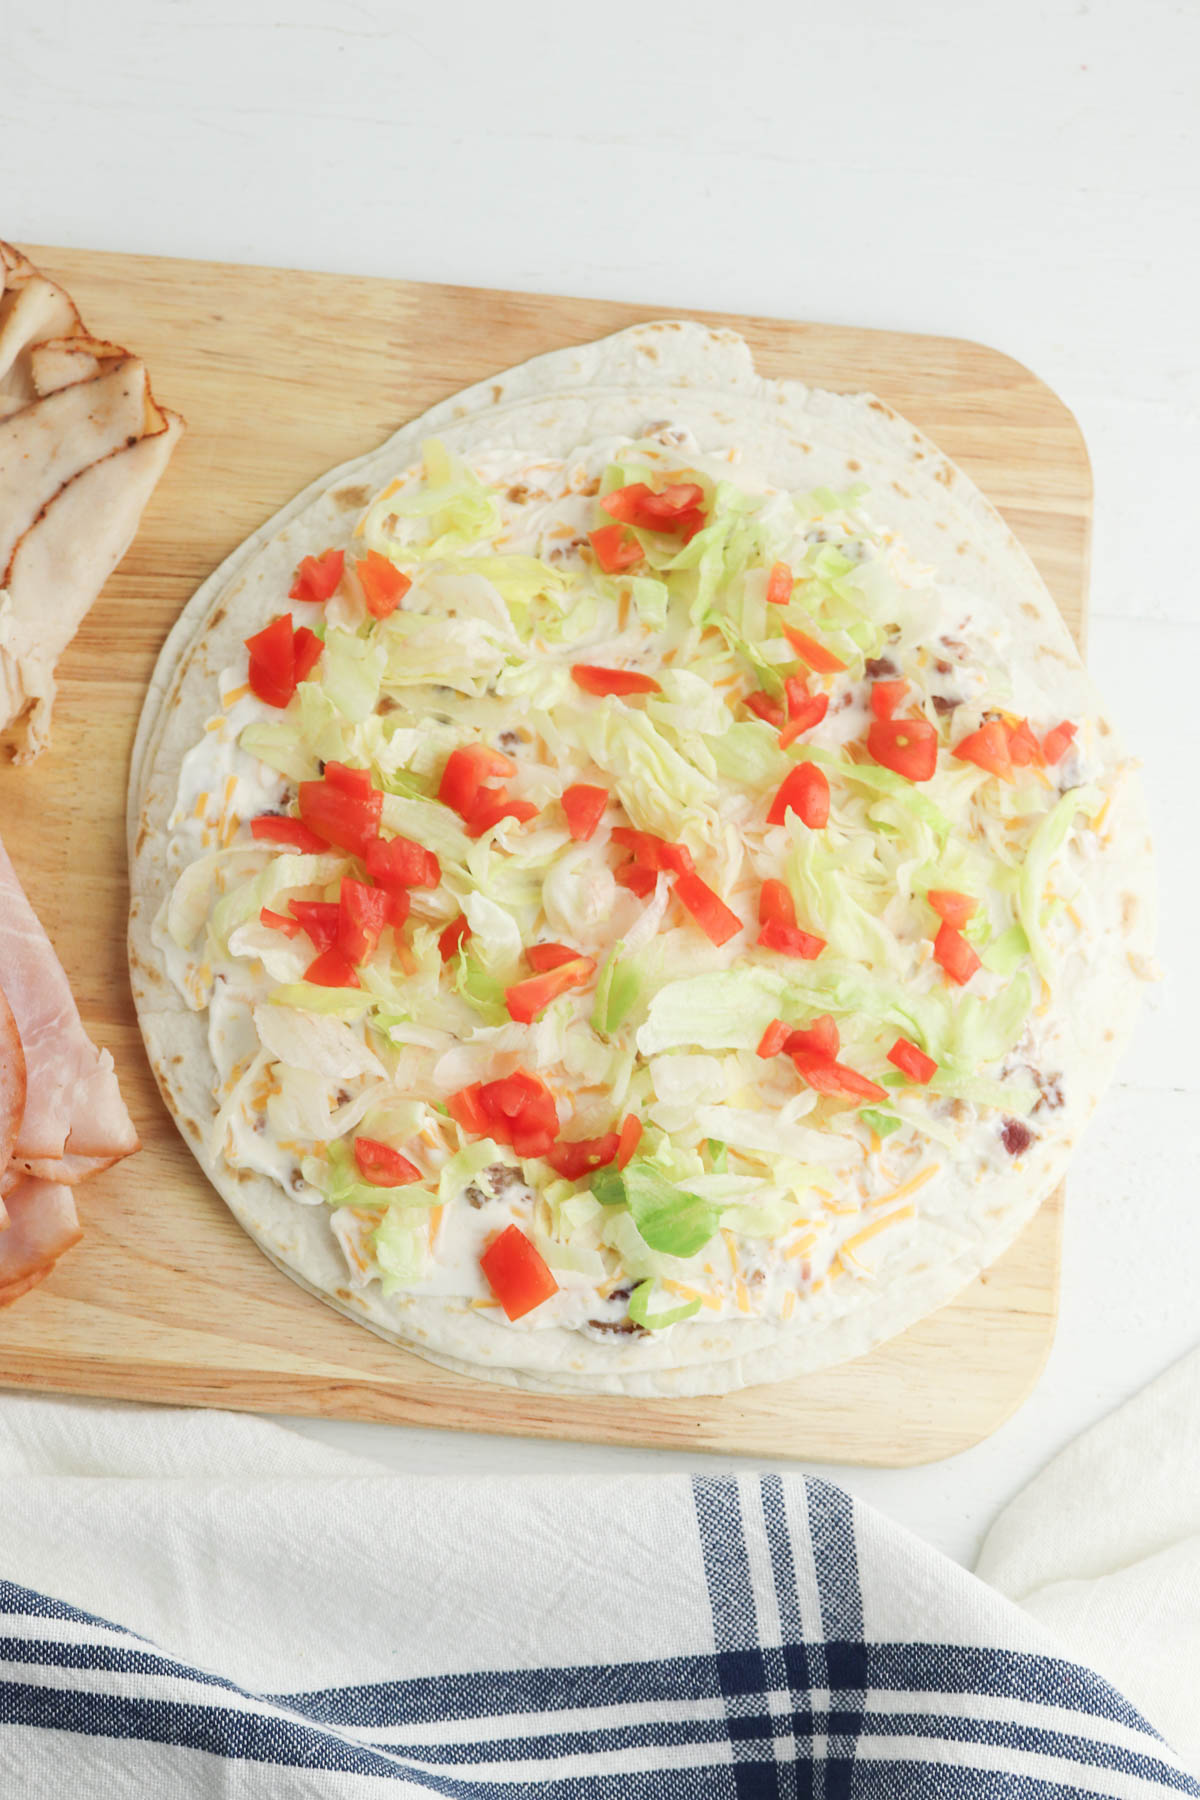 A flour tortilla on a wooden cutting board topped with shredded lettuce and diced tomatoes